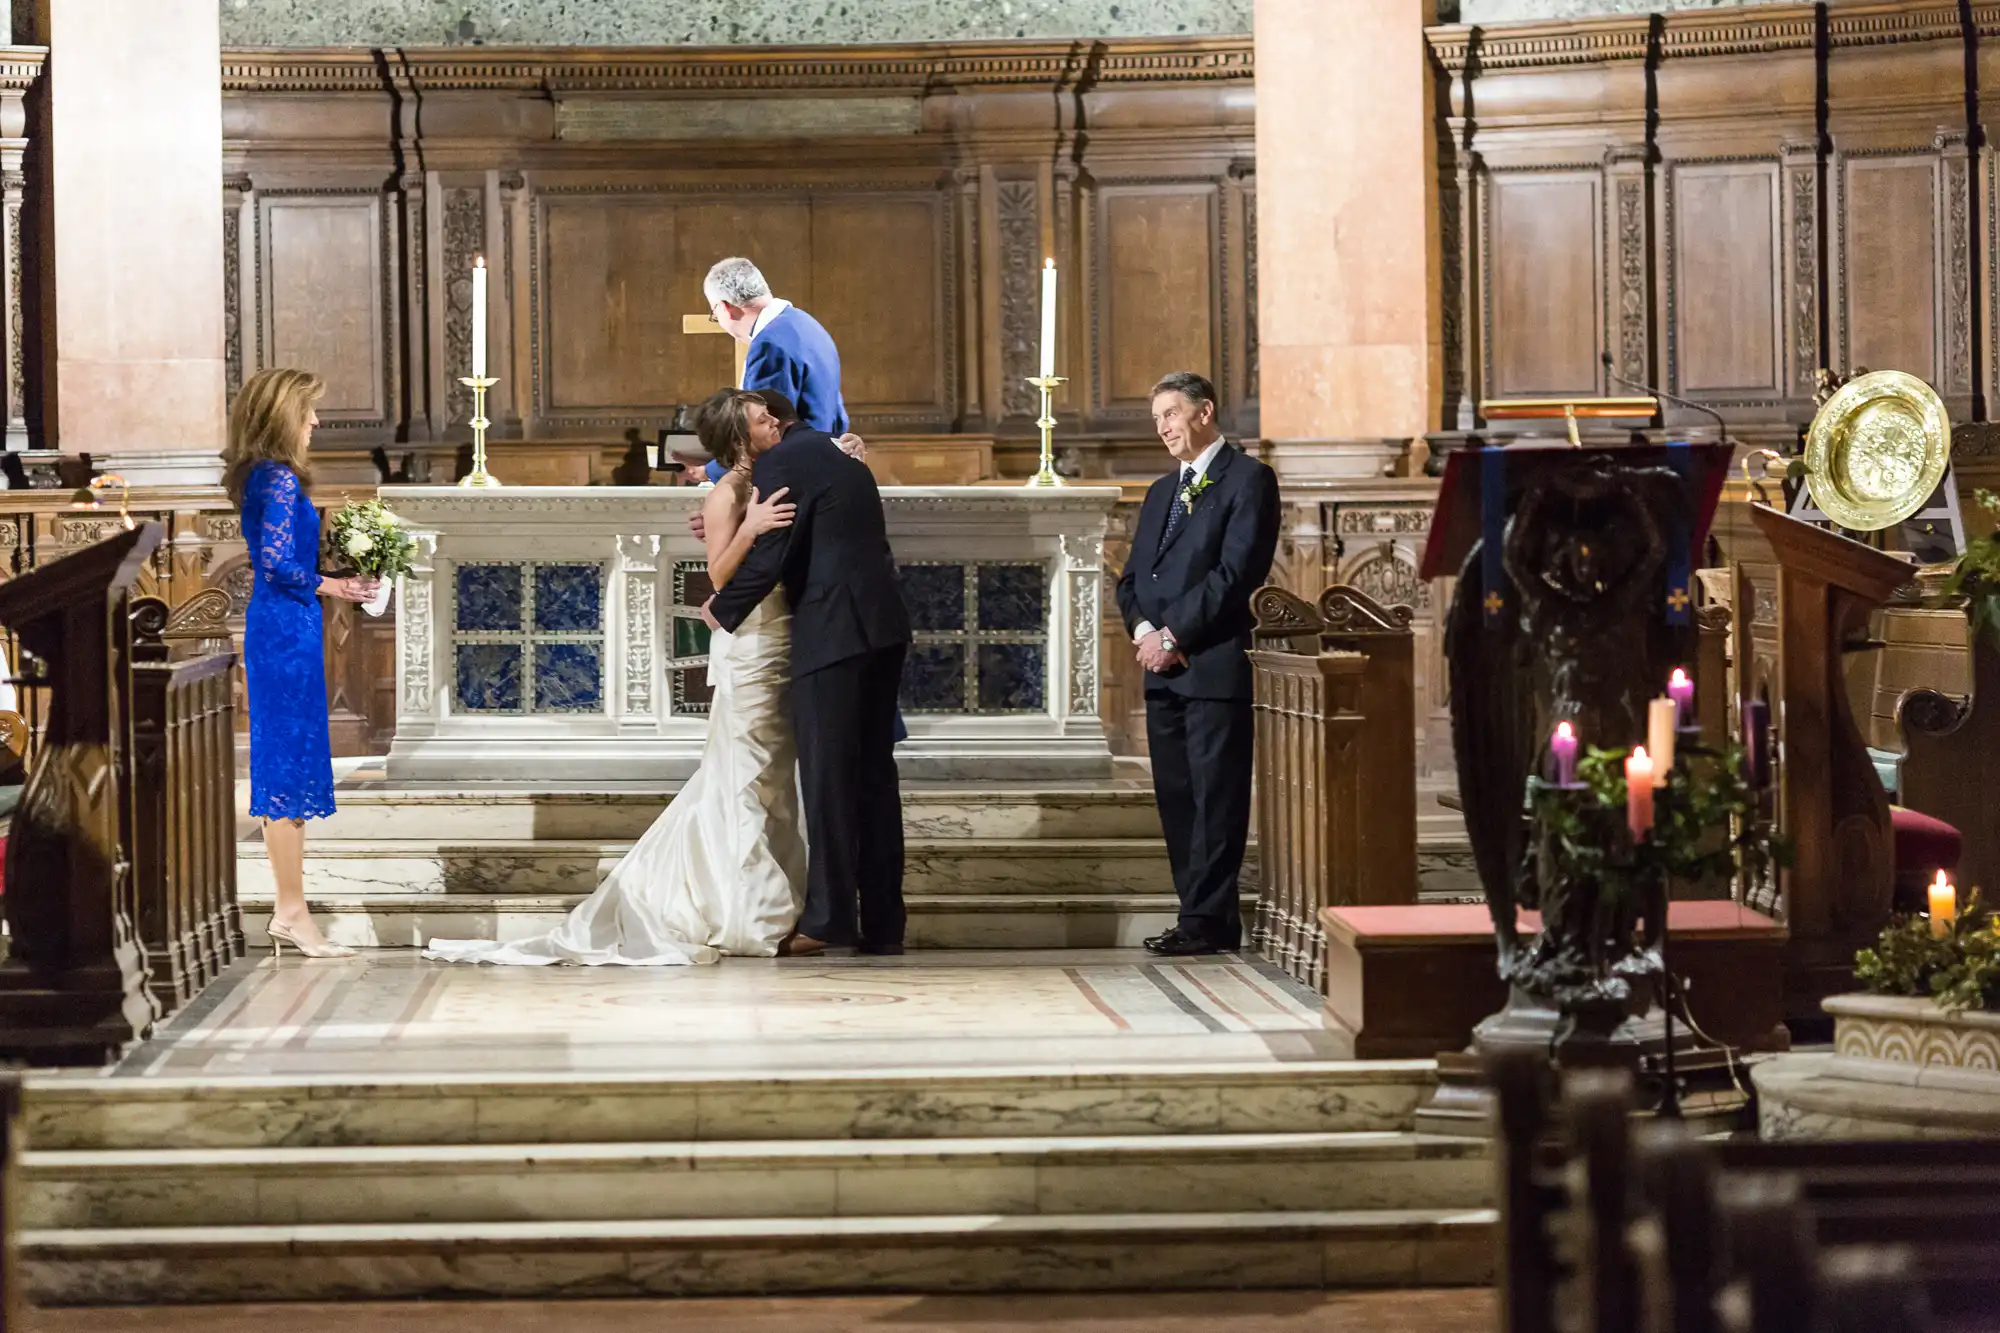 A bride and groom embracing at the altar in a church, with an officiant and two guests watching.